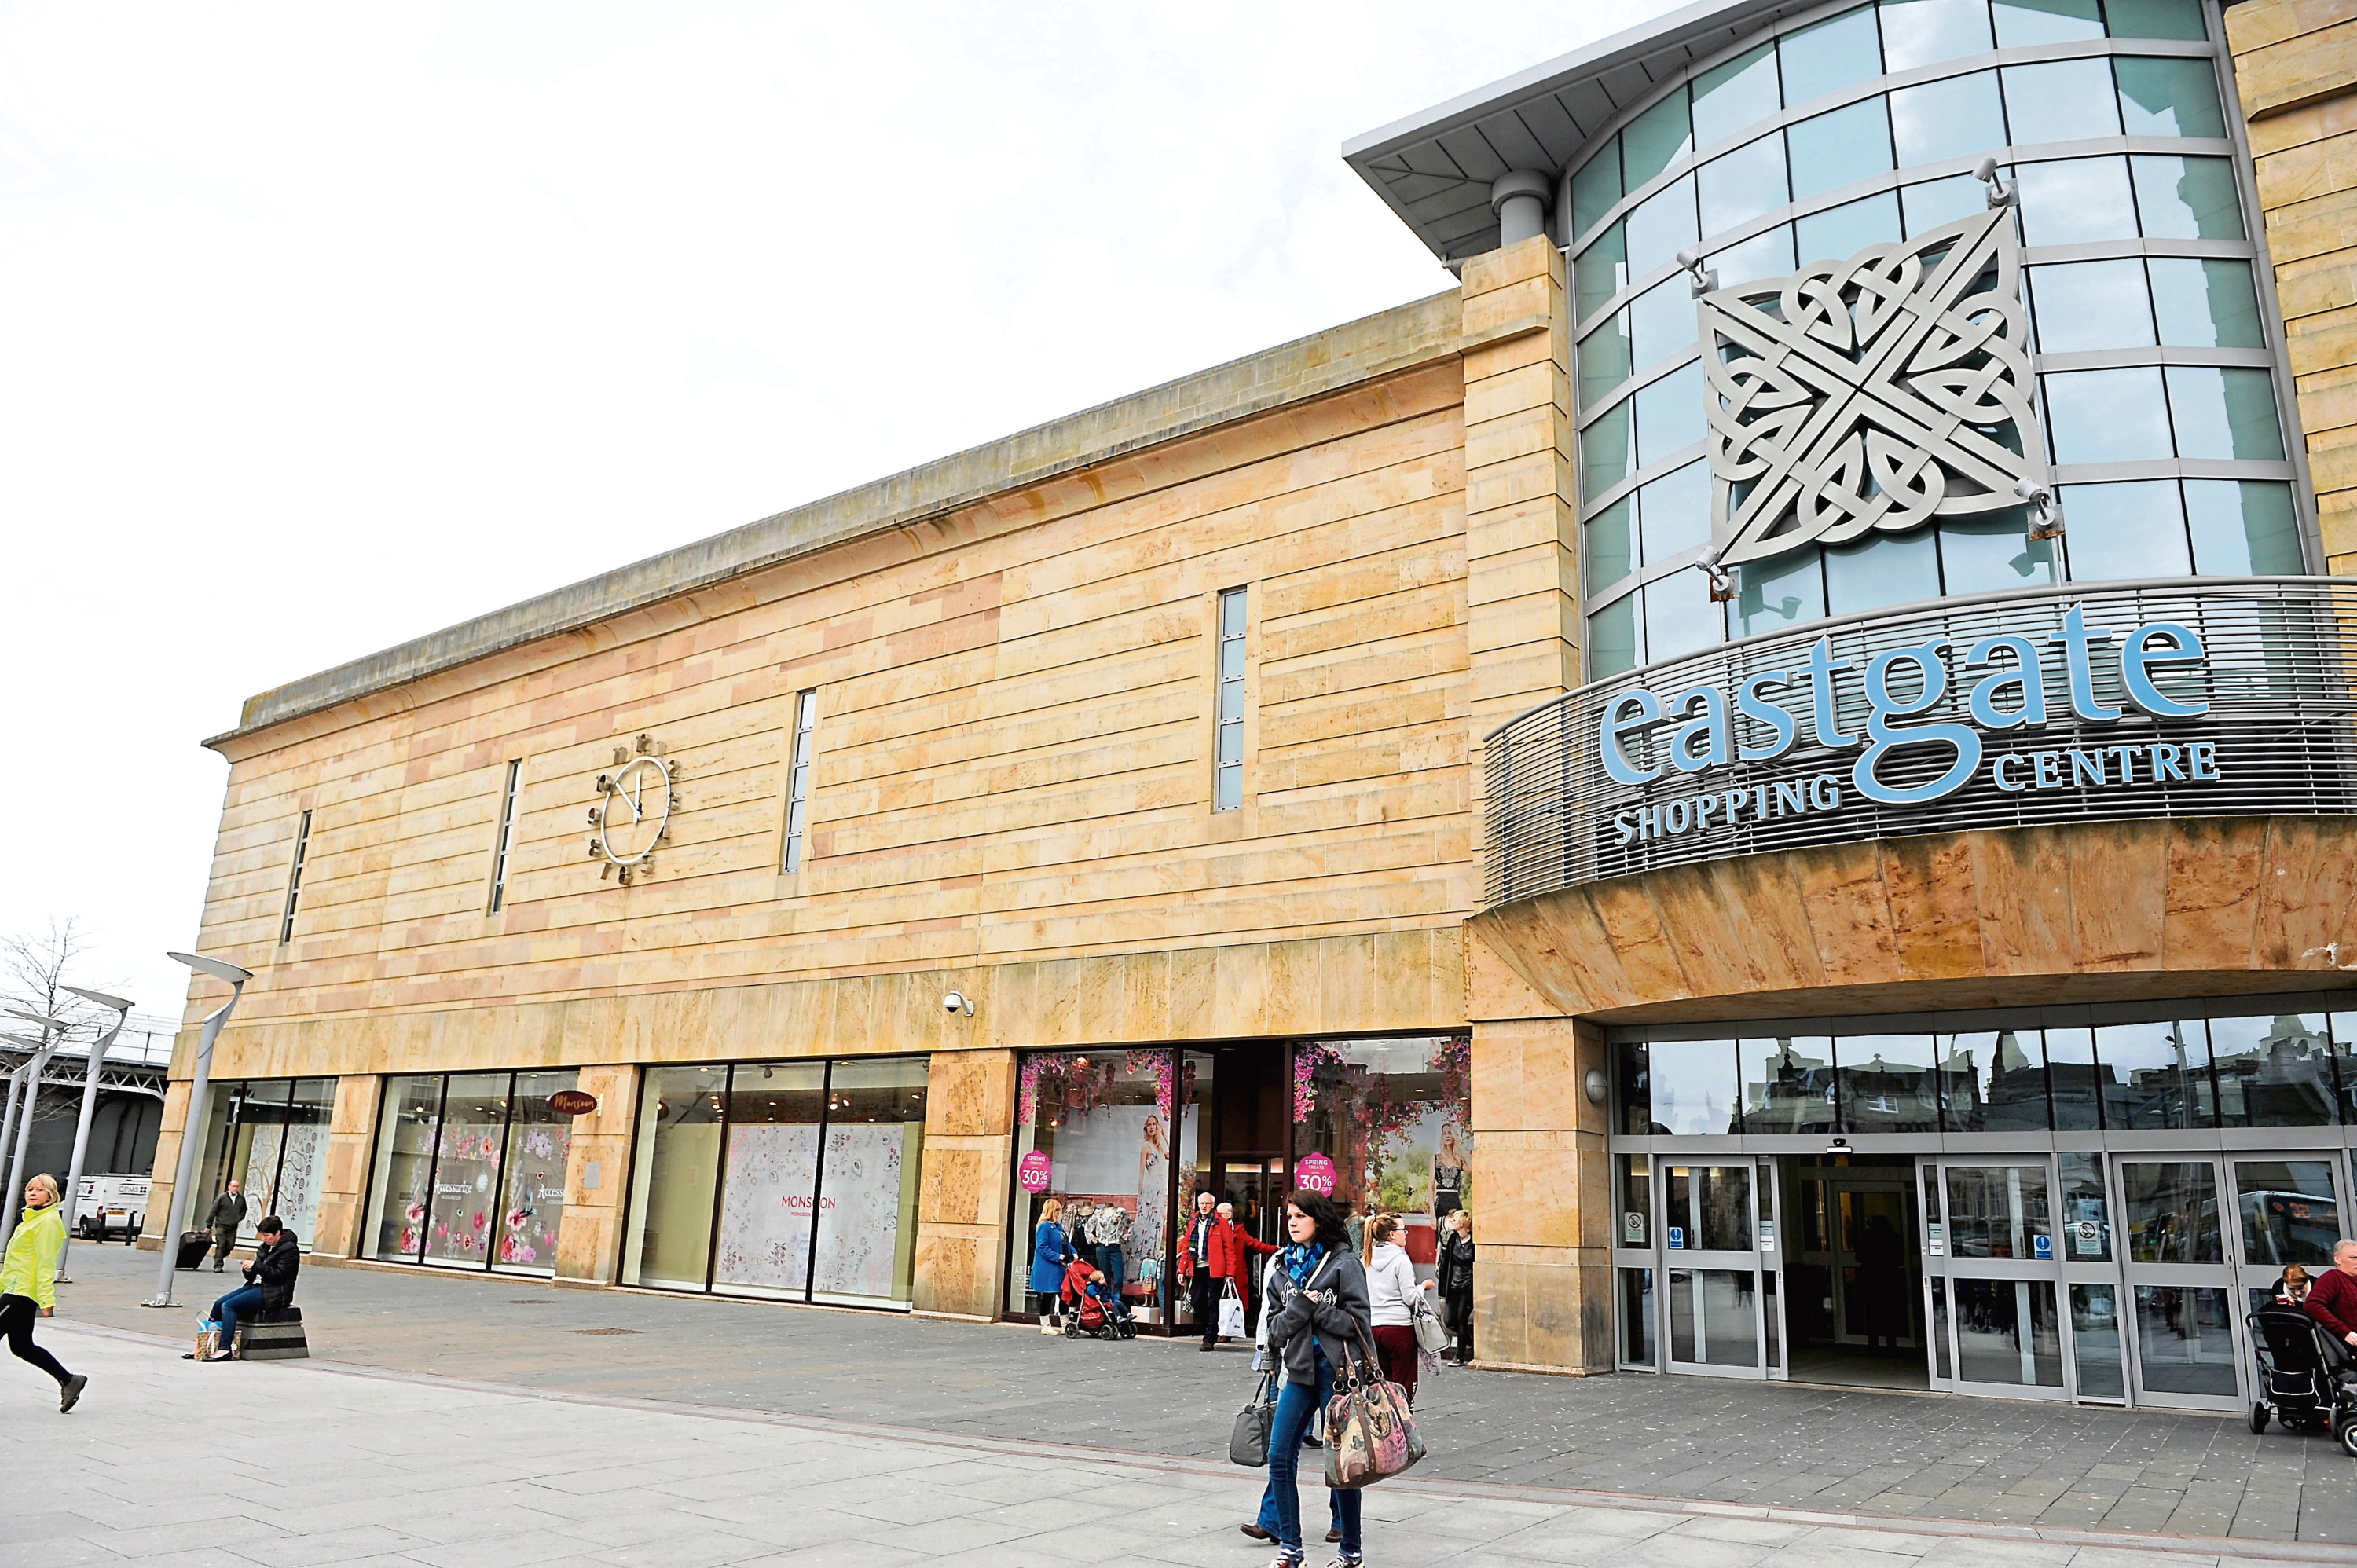 The Eastgate shopping centre in Inverness (Photo: DCT Media)